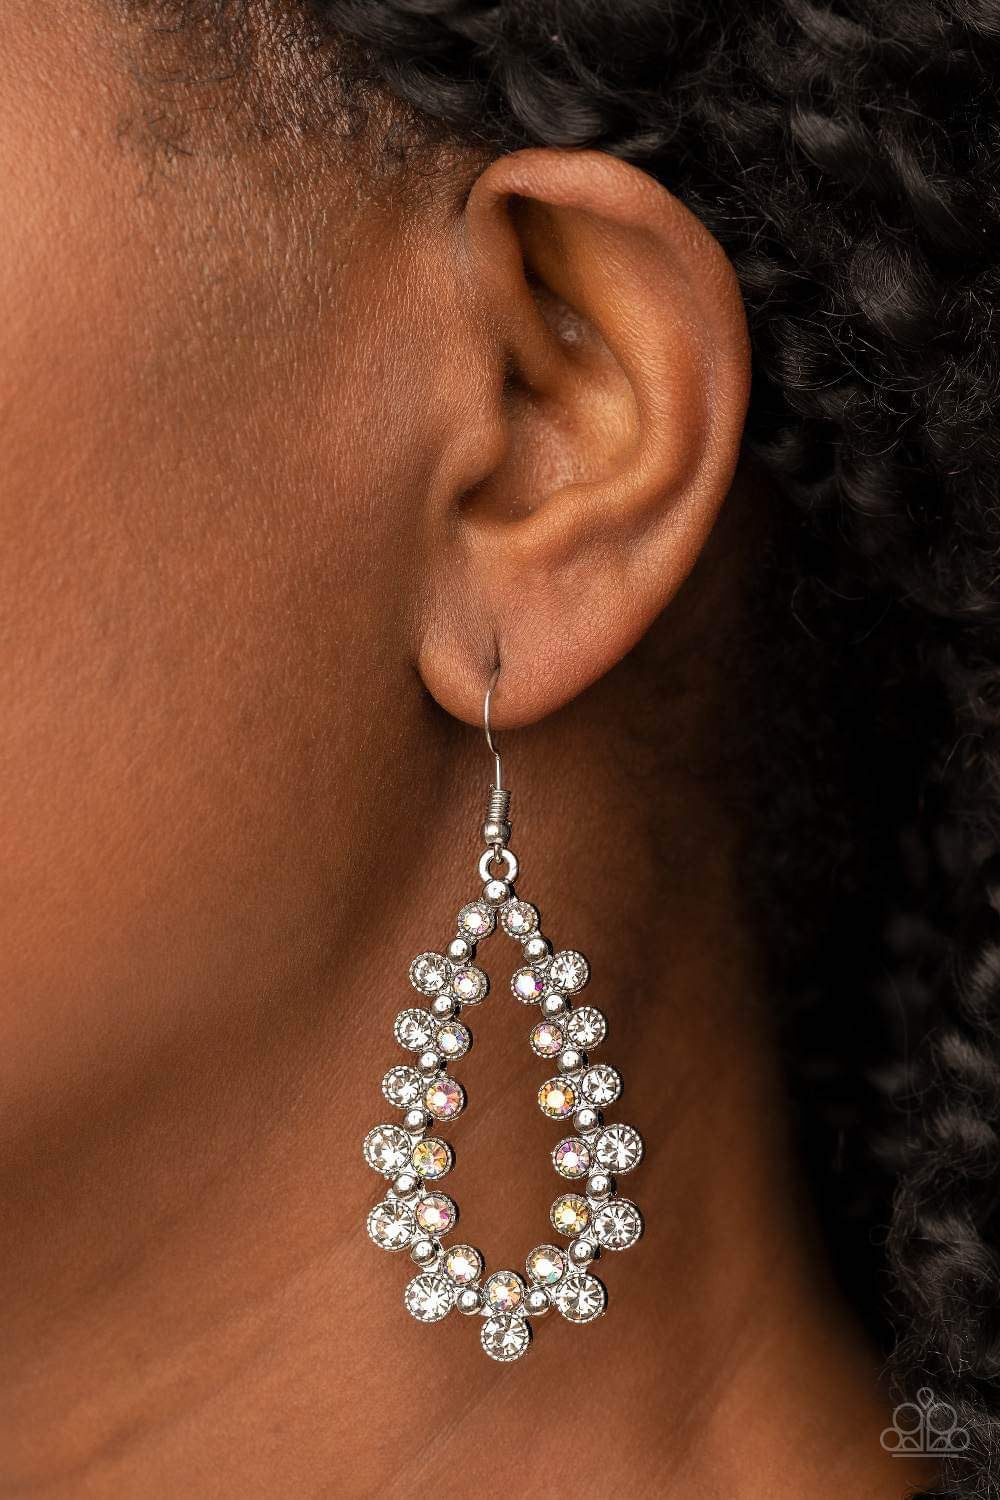 Its About to GLOW Down - White Earring 2928e